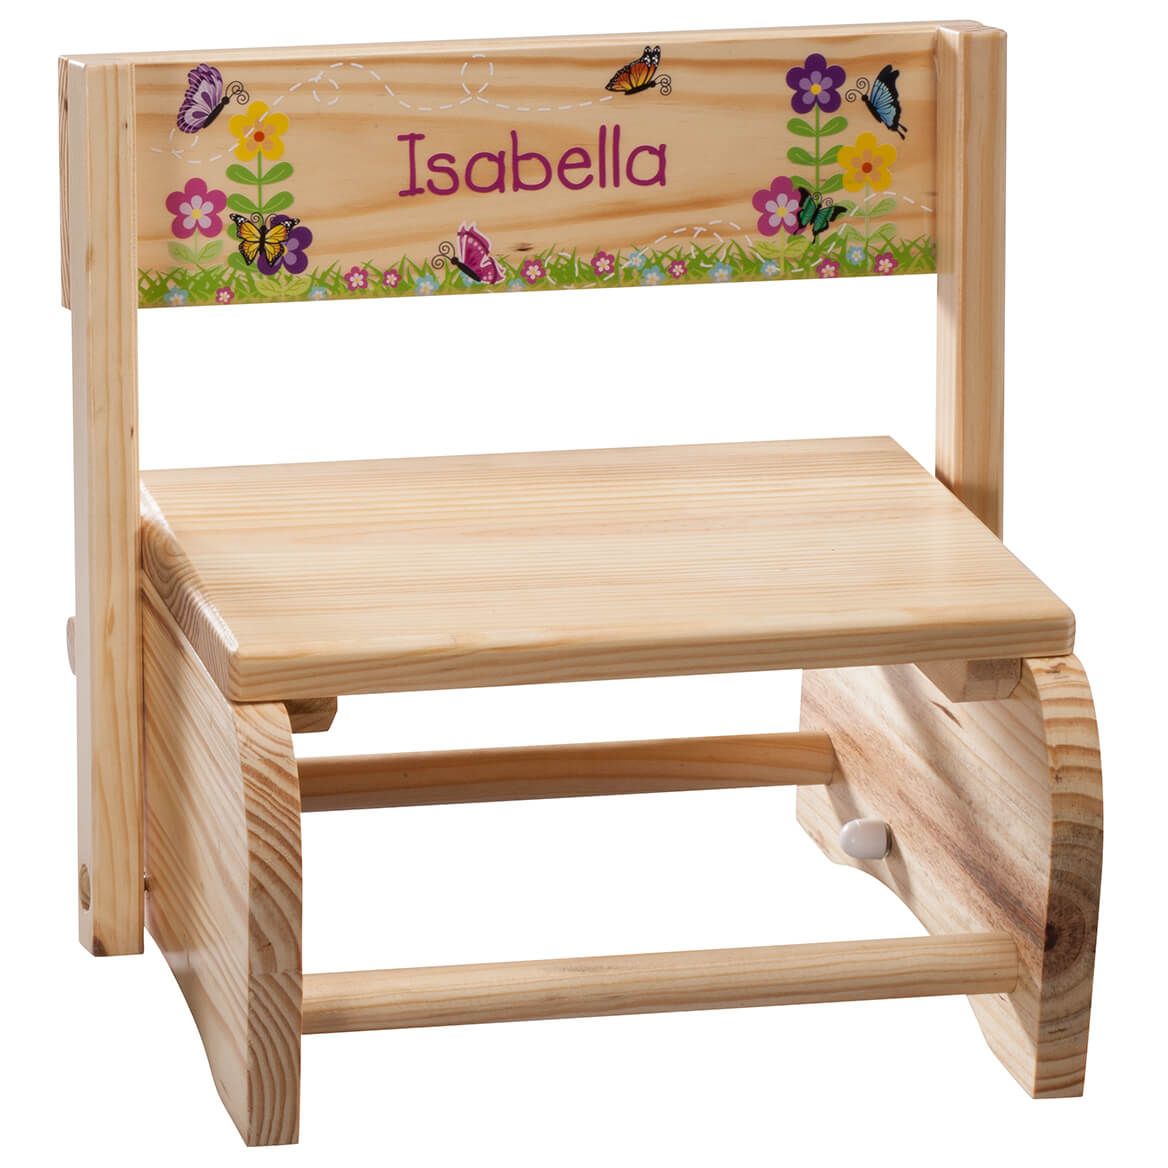 Personalized Children's Butterflies & Flowers Step Stool + '-' + 365667